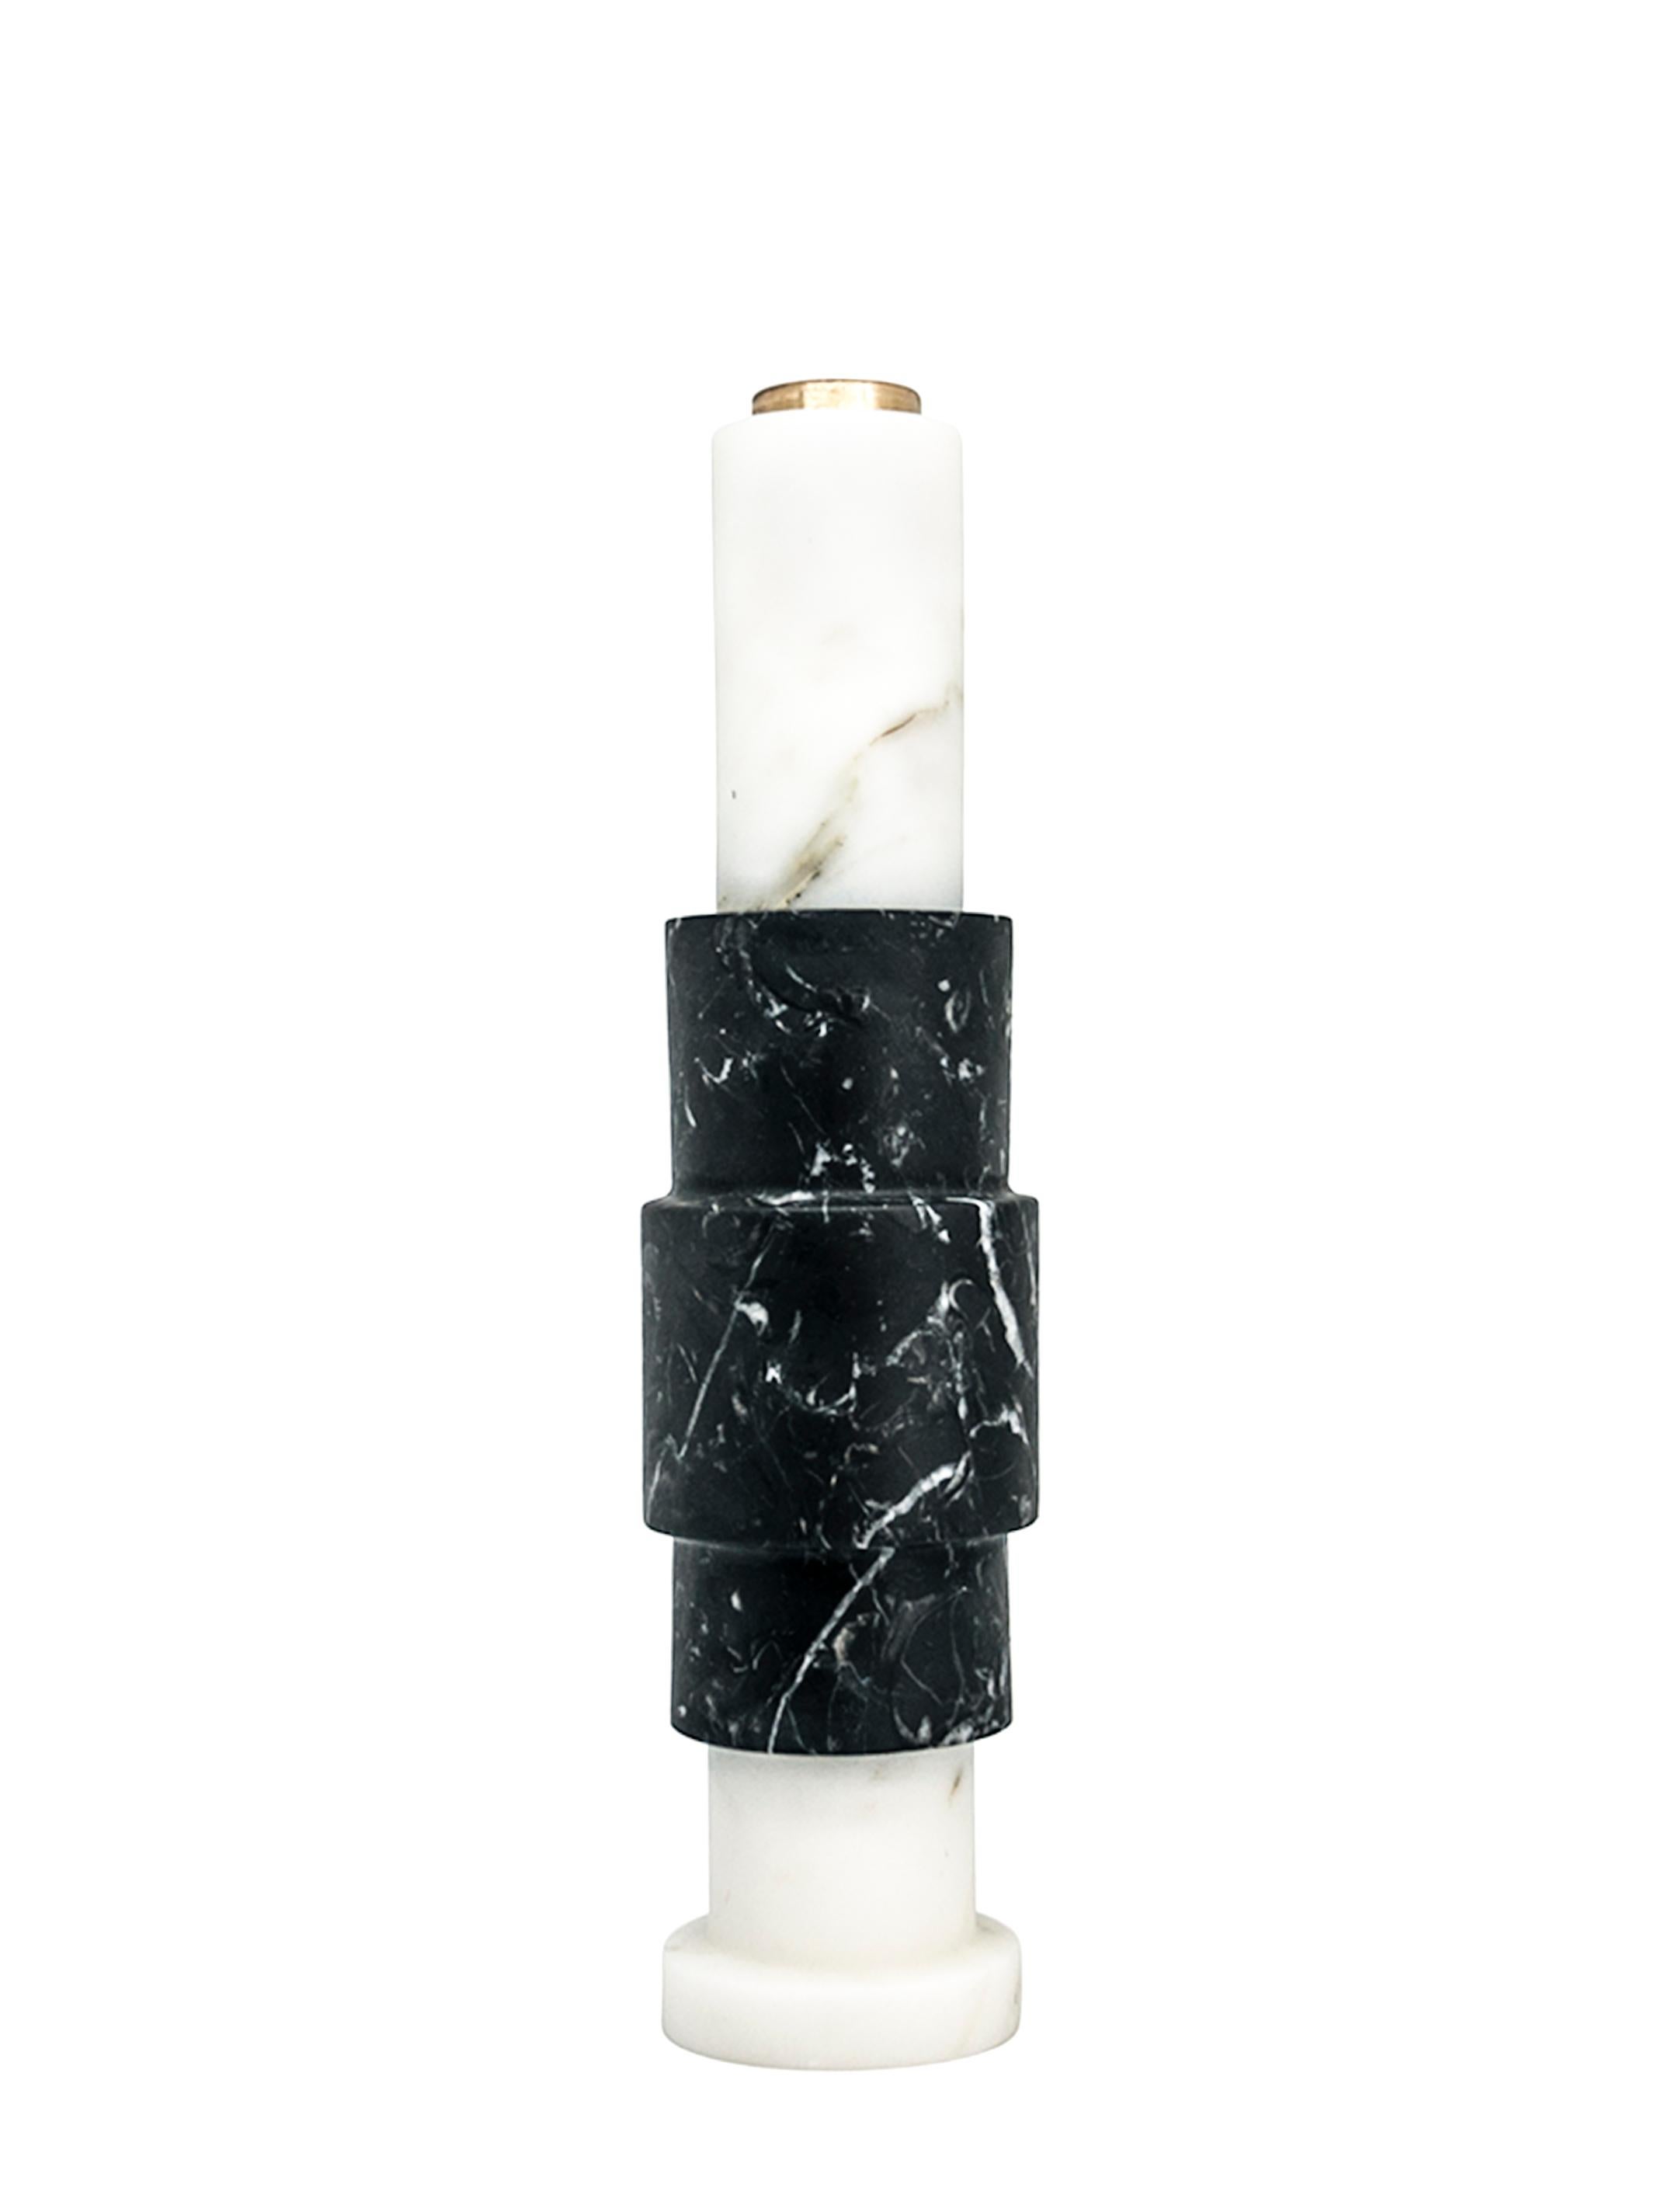 High squared two-tone candleholder in white Carrara marble, black Marquina marble and brass. 
-Jacopo Simonetti Design for FiammettaV-
Each piece is in a way unique (every marble block is different in veins and shades) and handmade by Italian